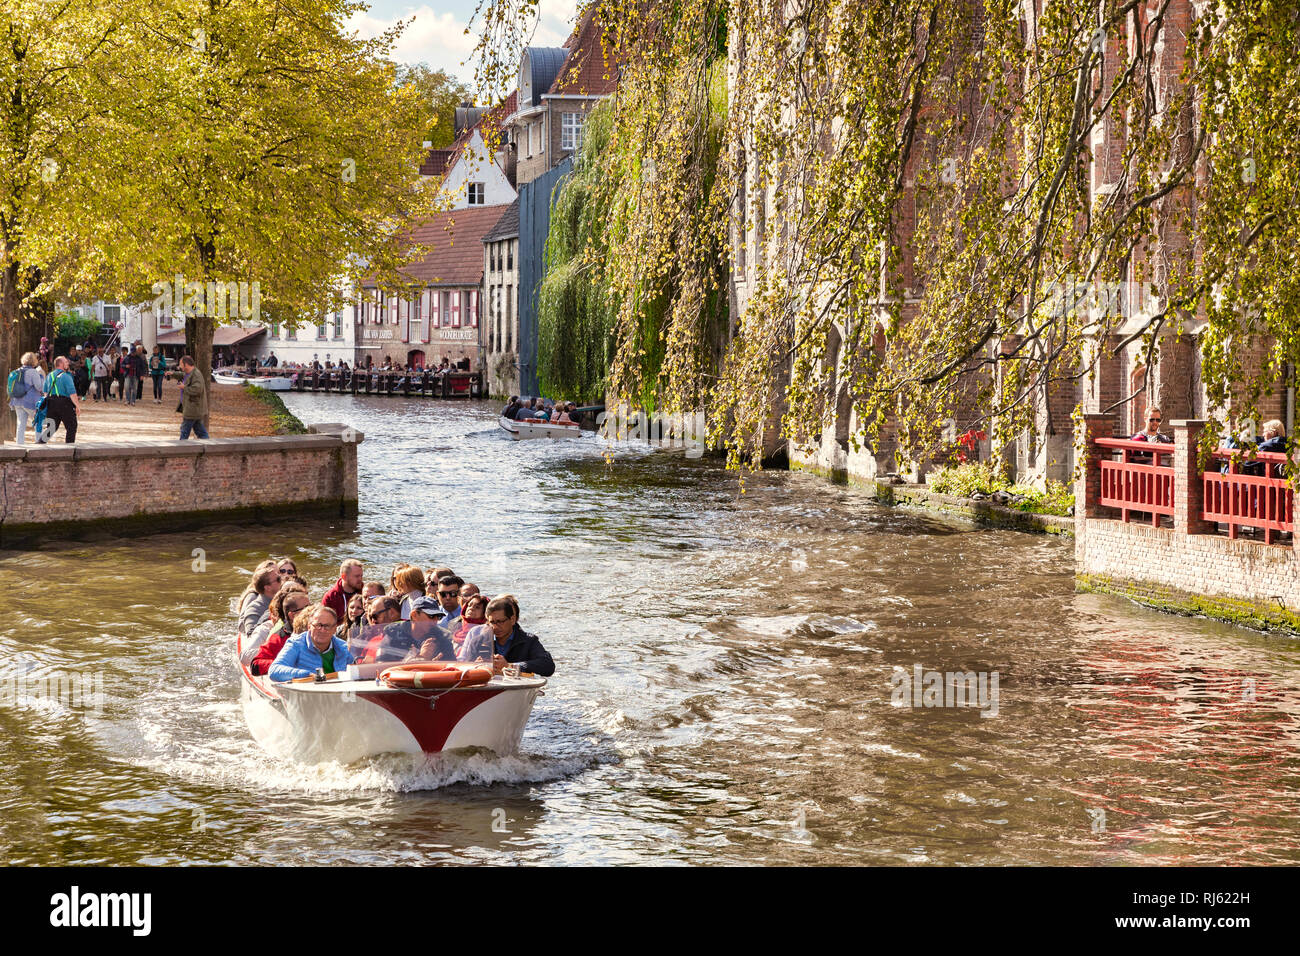 25 September 2018: Bruges, Belgium - Sightseeing boat on the Bruges canal on a sunny autumn day, trees turning to autumn colours. Stock Photo